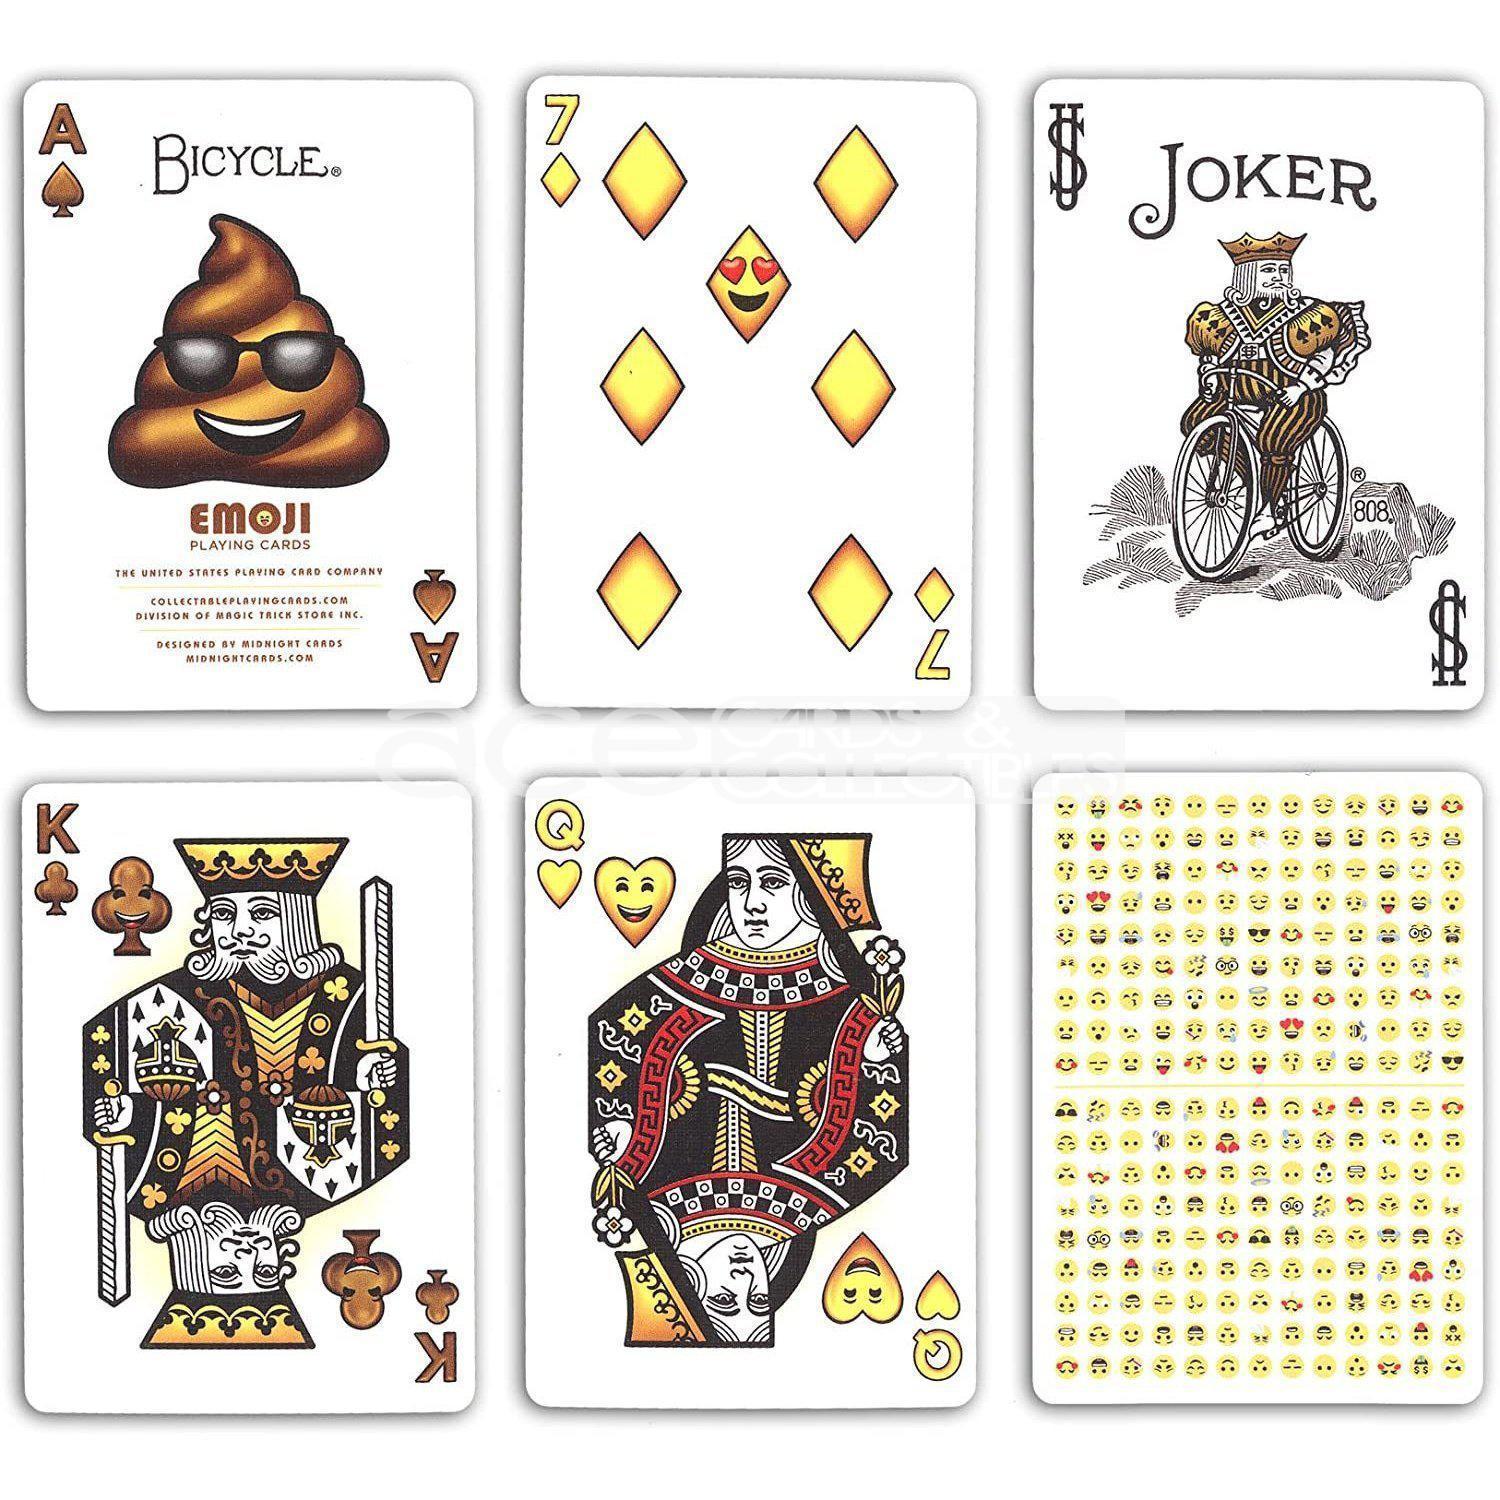 Bicycle Emoji Playing Cards-United States Playing Cards Company-Ace Cards & Collectibles